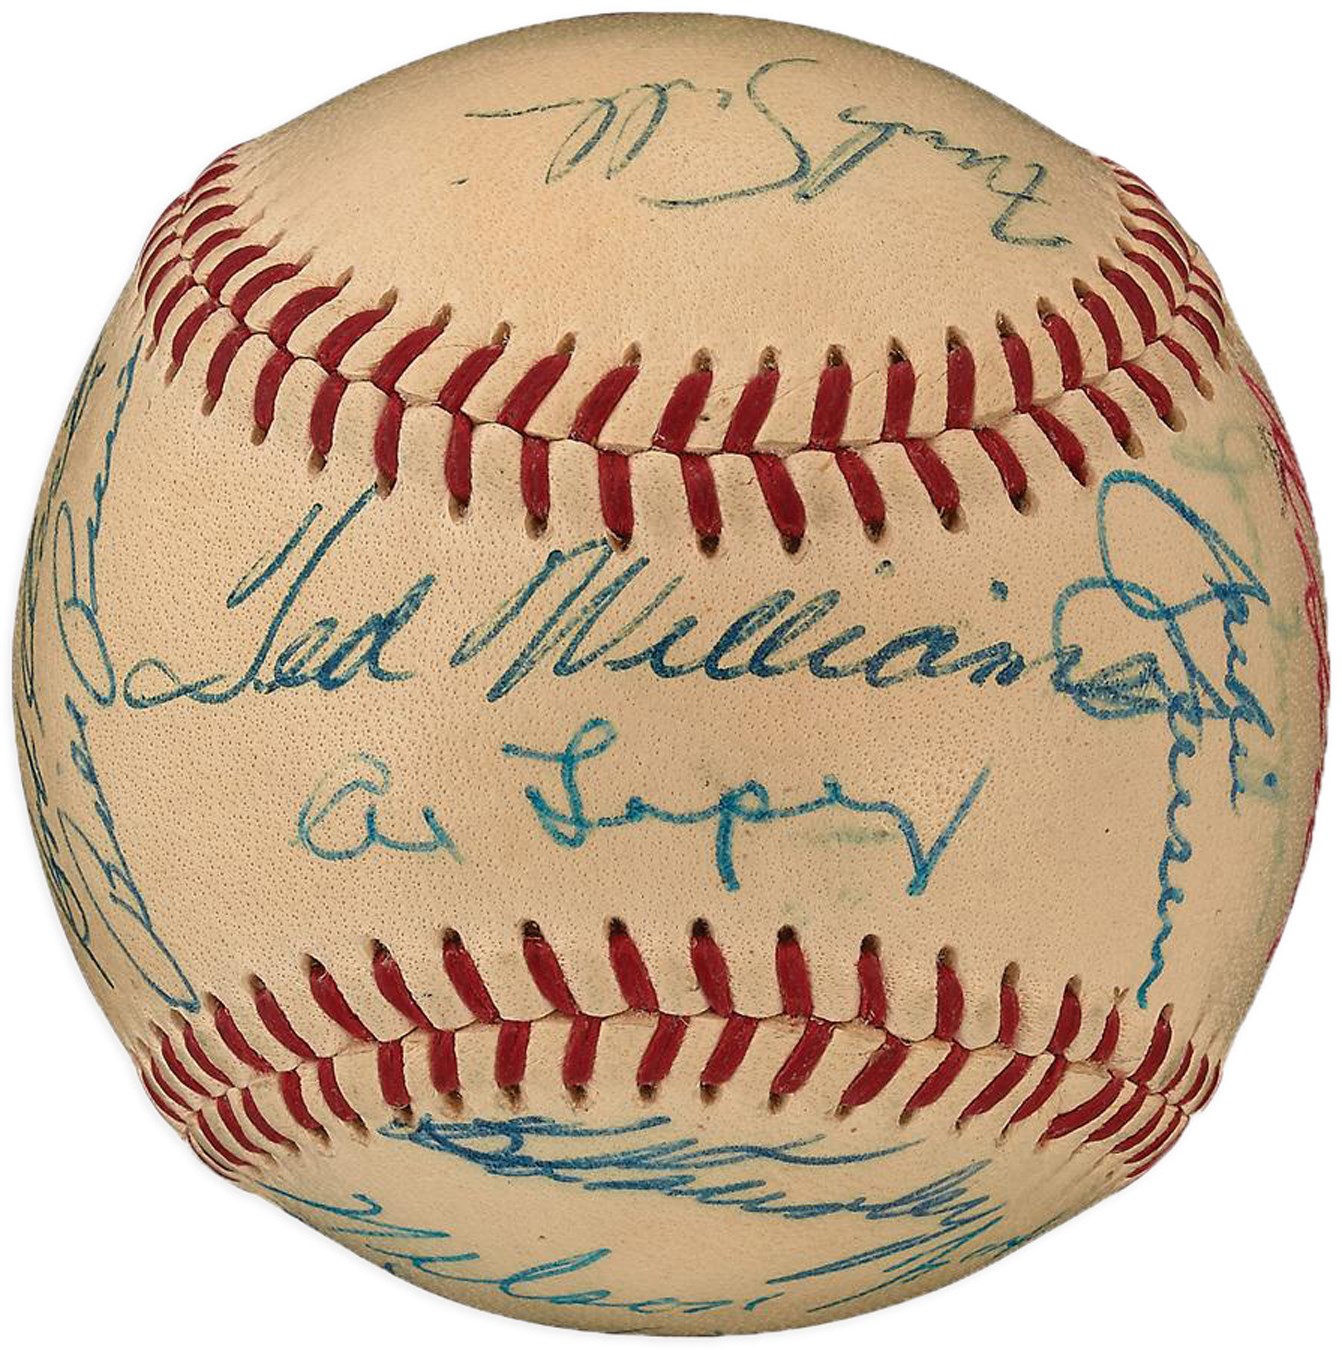 - 1955 American League All-Star Team-Signed Baseball - PSA Authenticated (Kluszewski Collection)